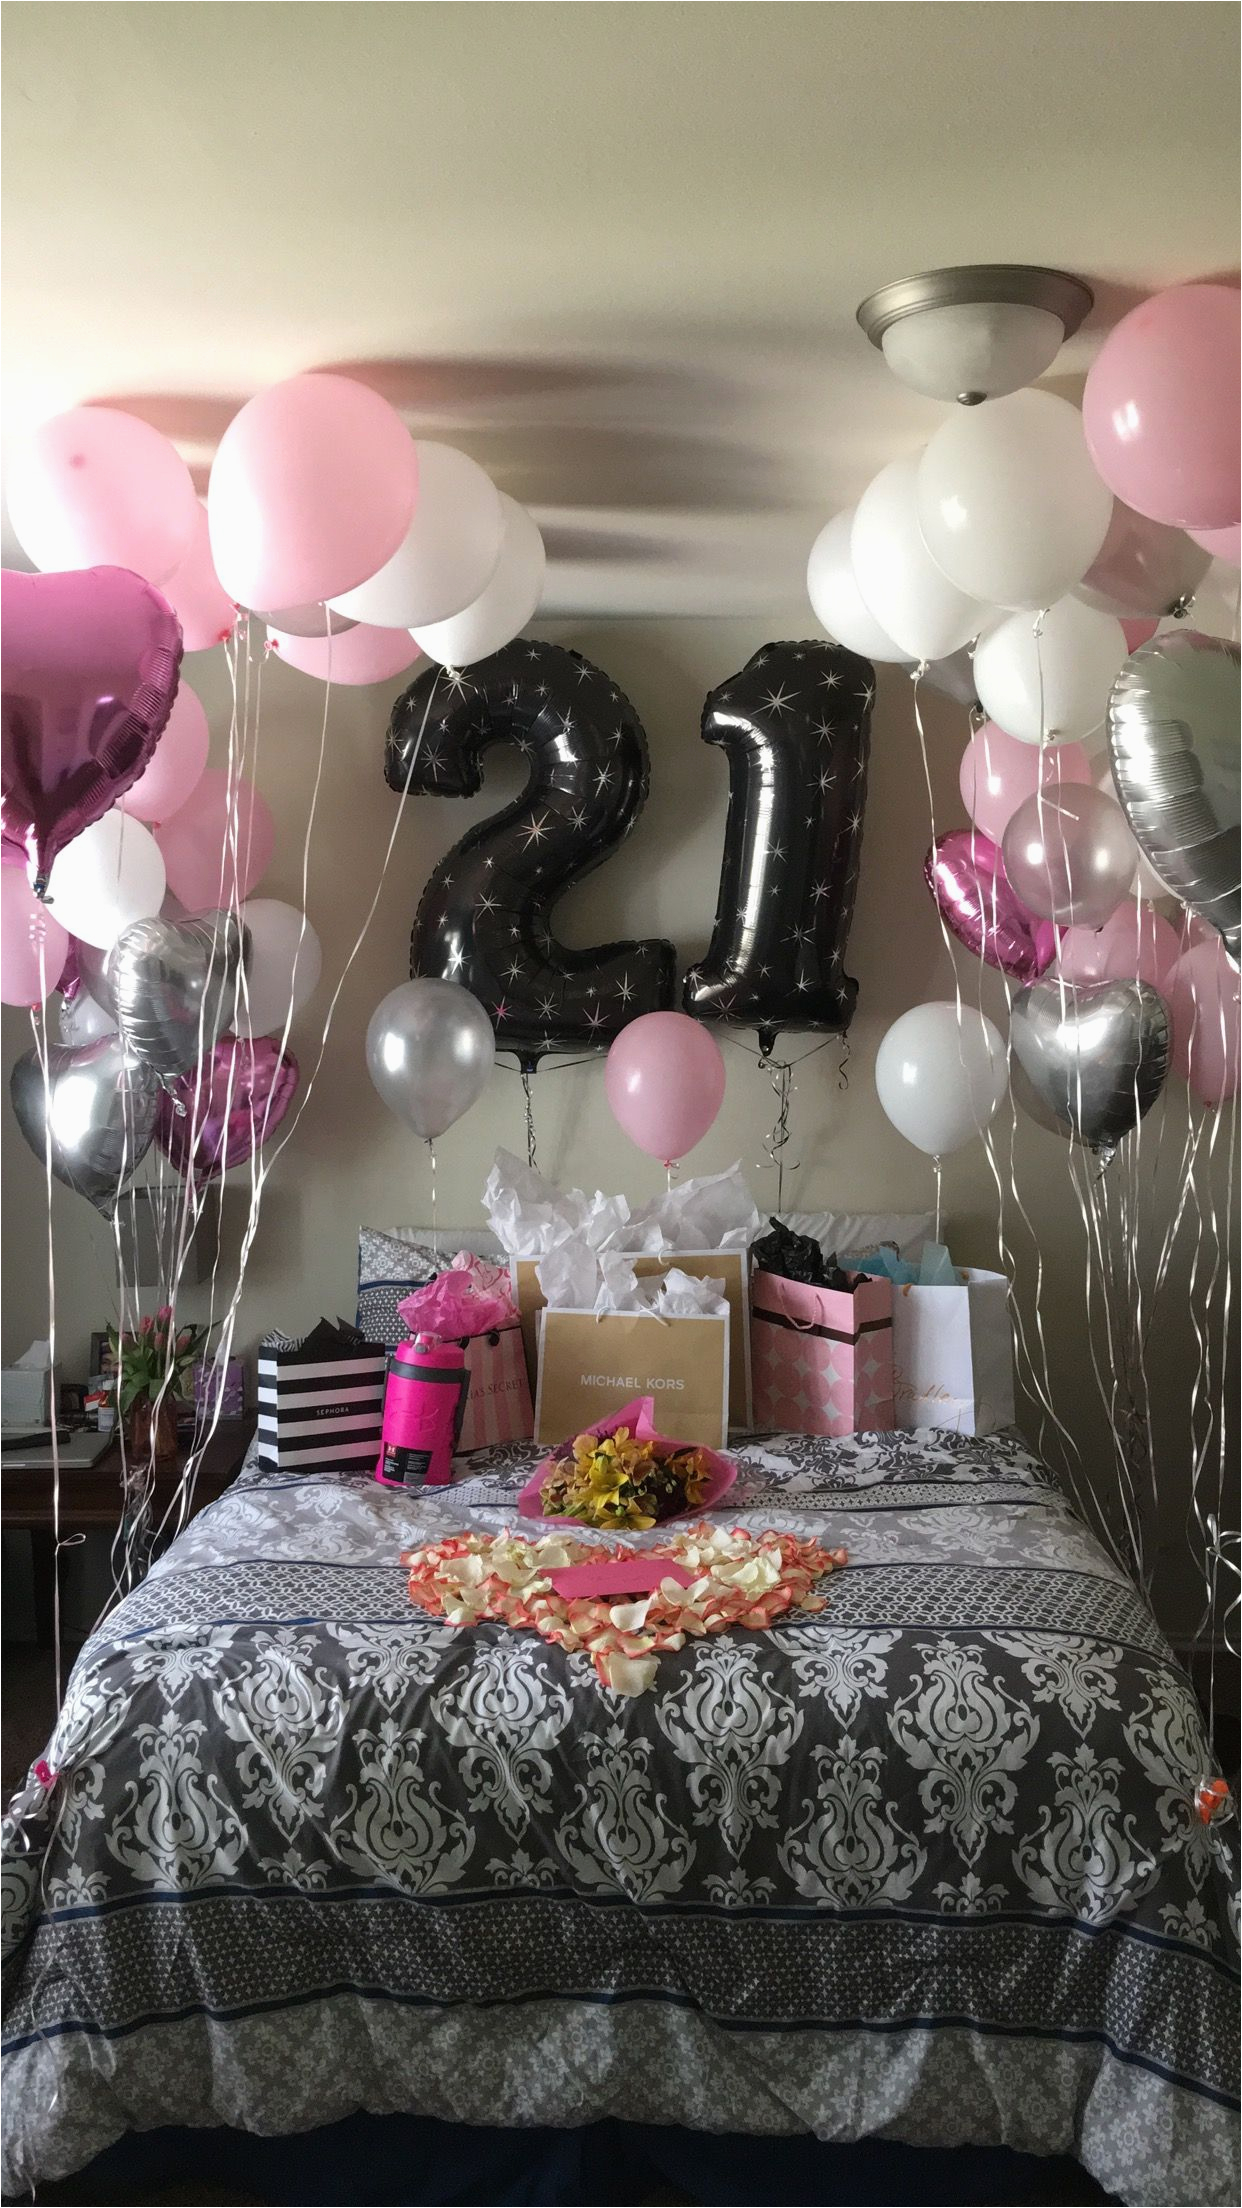 Surprise Gifts for Girlfriend On Her Birthday 21st Birthday Surprise Girlfriends Birthday Pinterest